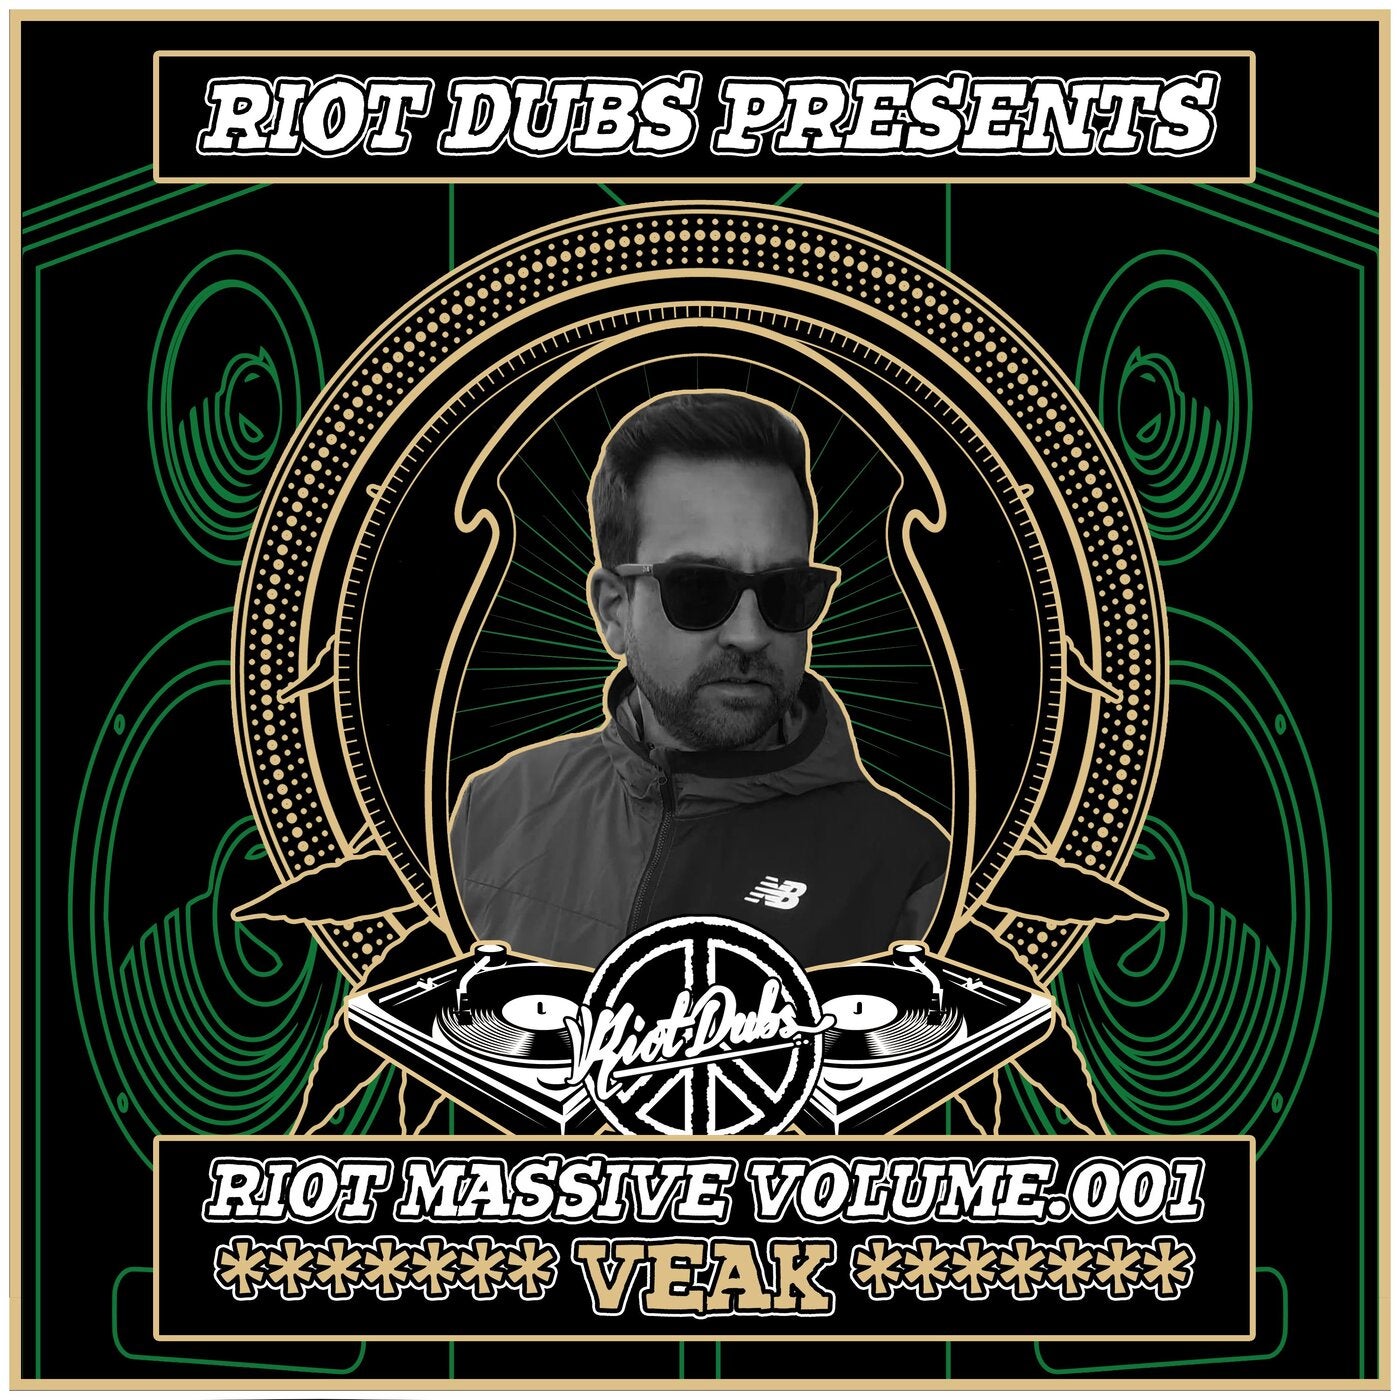 Riot Massive 001 from Riot Dubs on Beatport